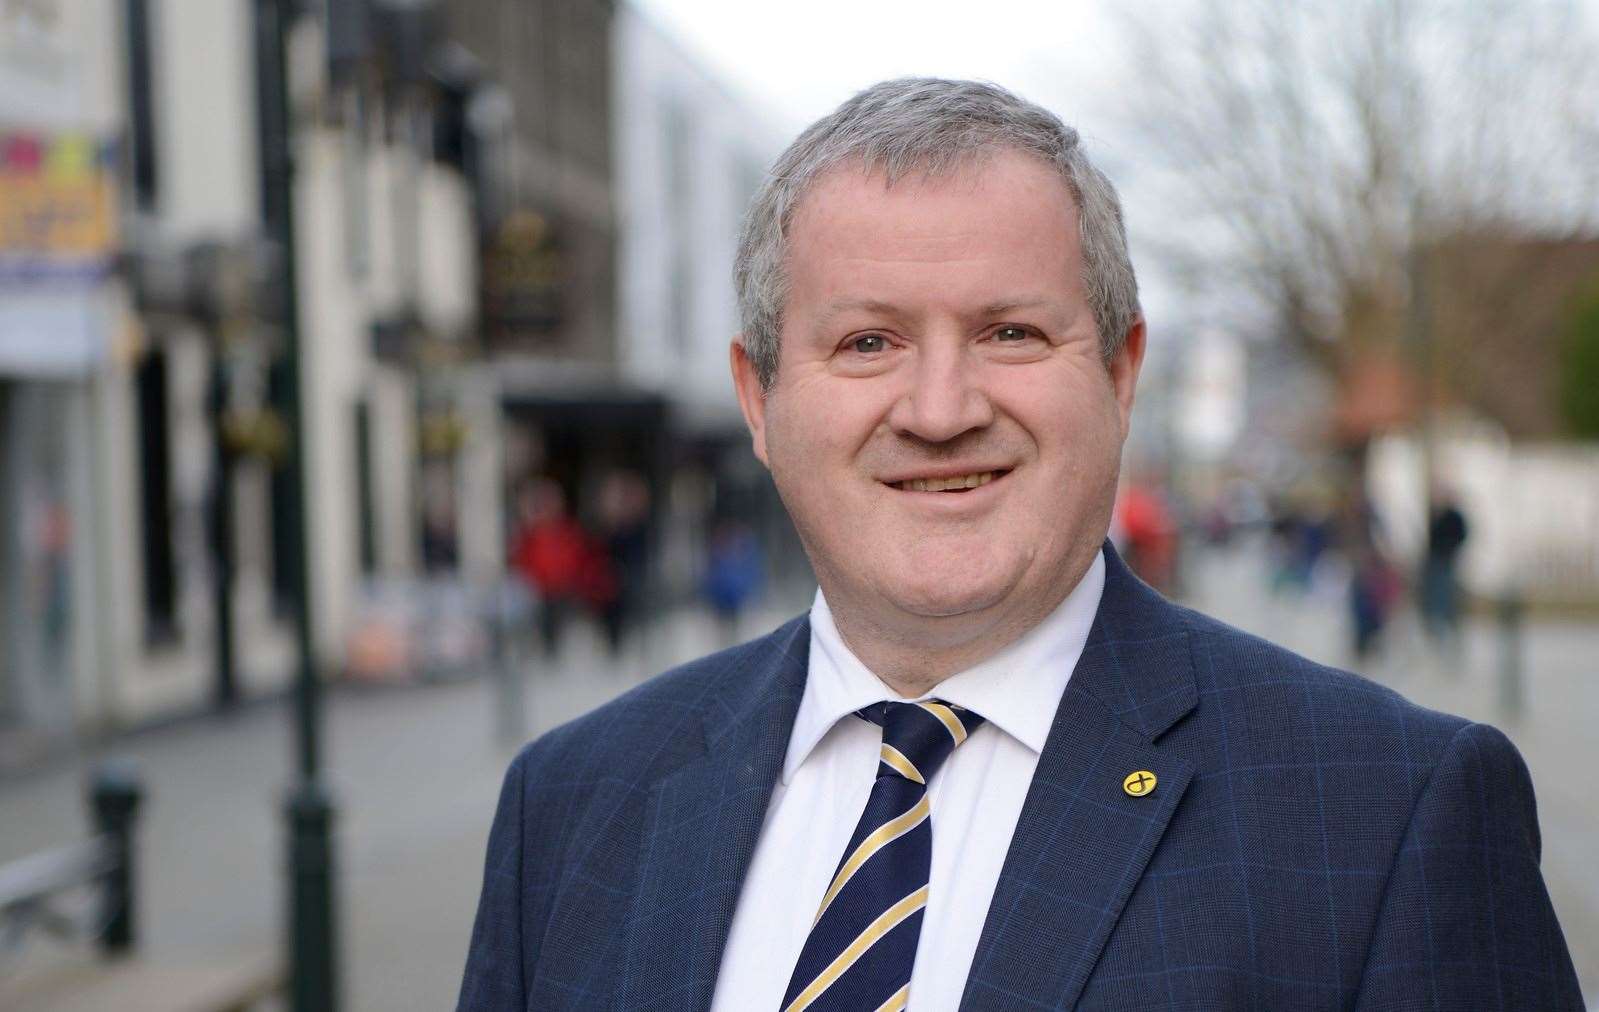 North MP Ian Blackford: 'The only unwelcome visitor is Covid-19'.